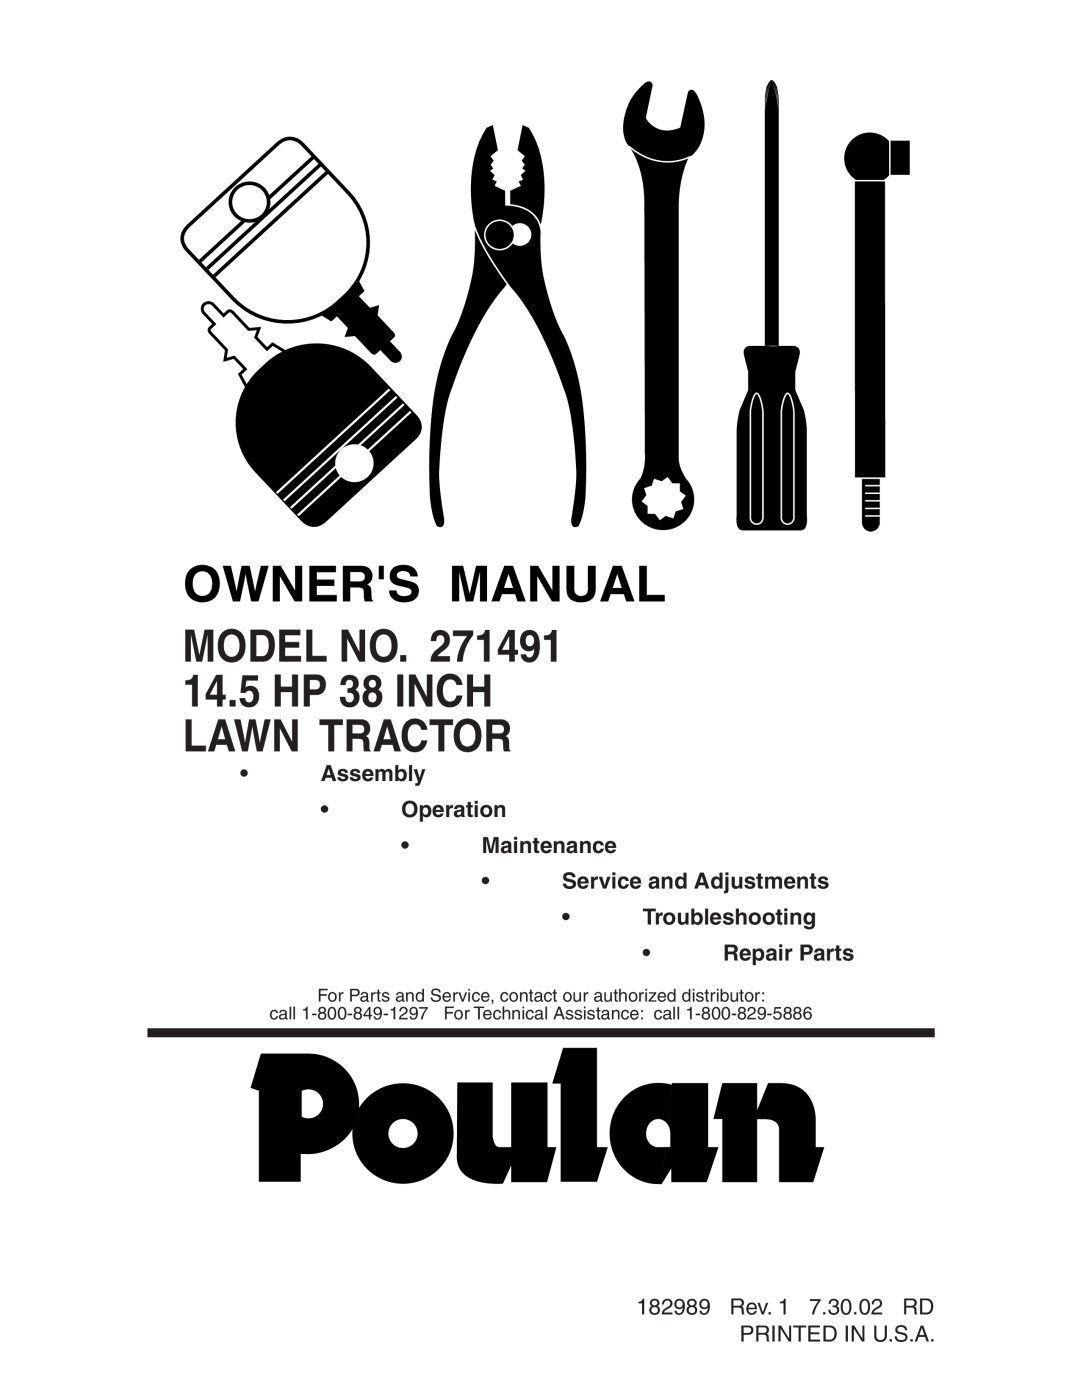 Poulan 271491 manual Model No, 14.5 HP 38 INCH LAWN TRACTOR 